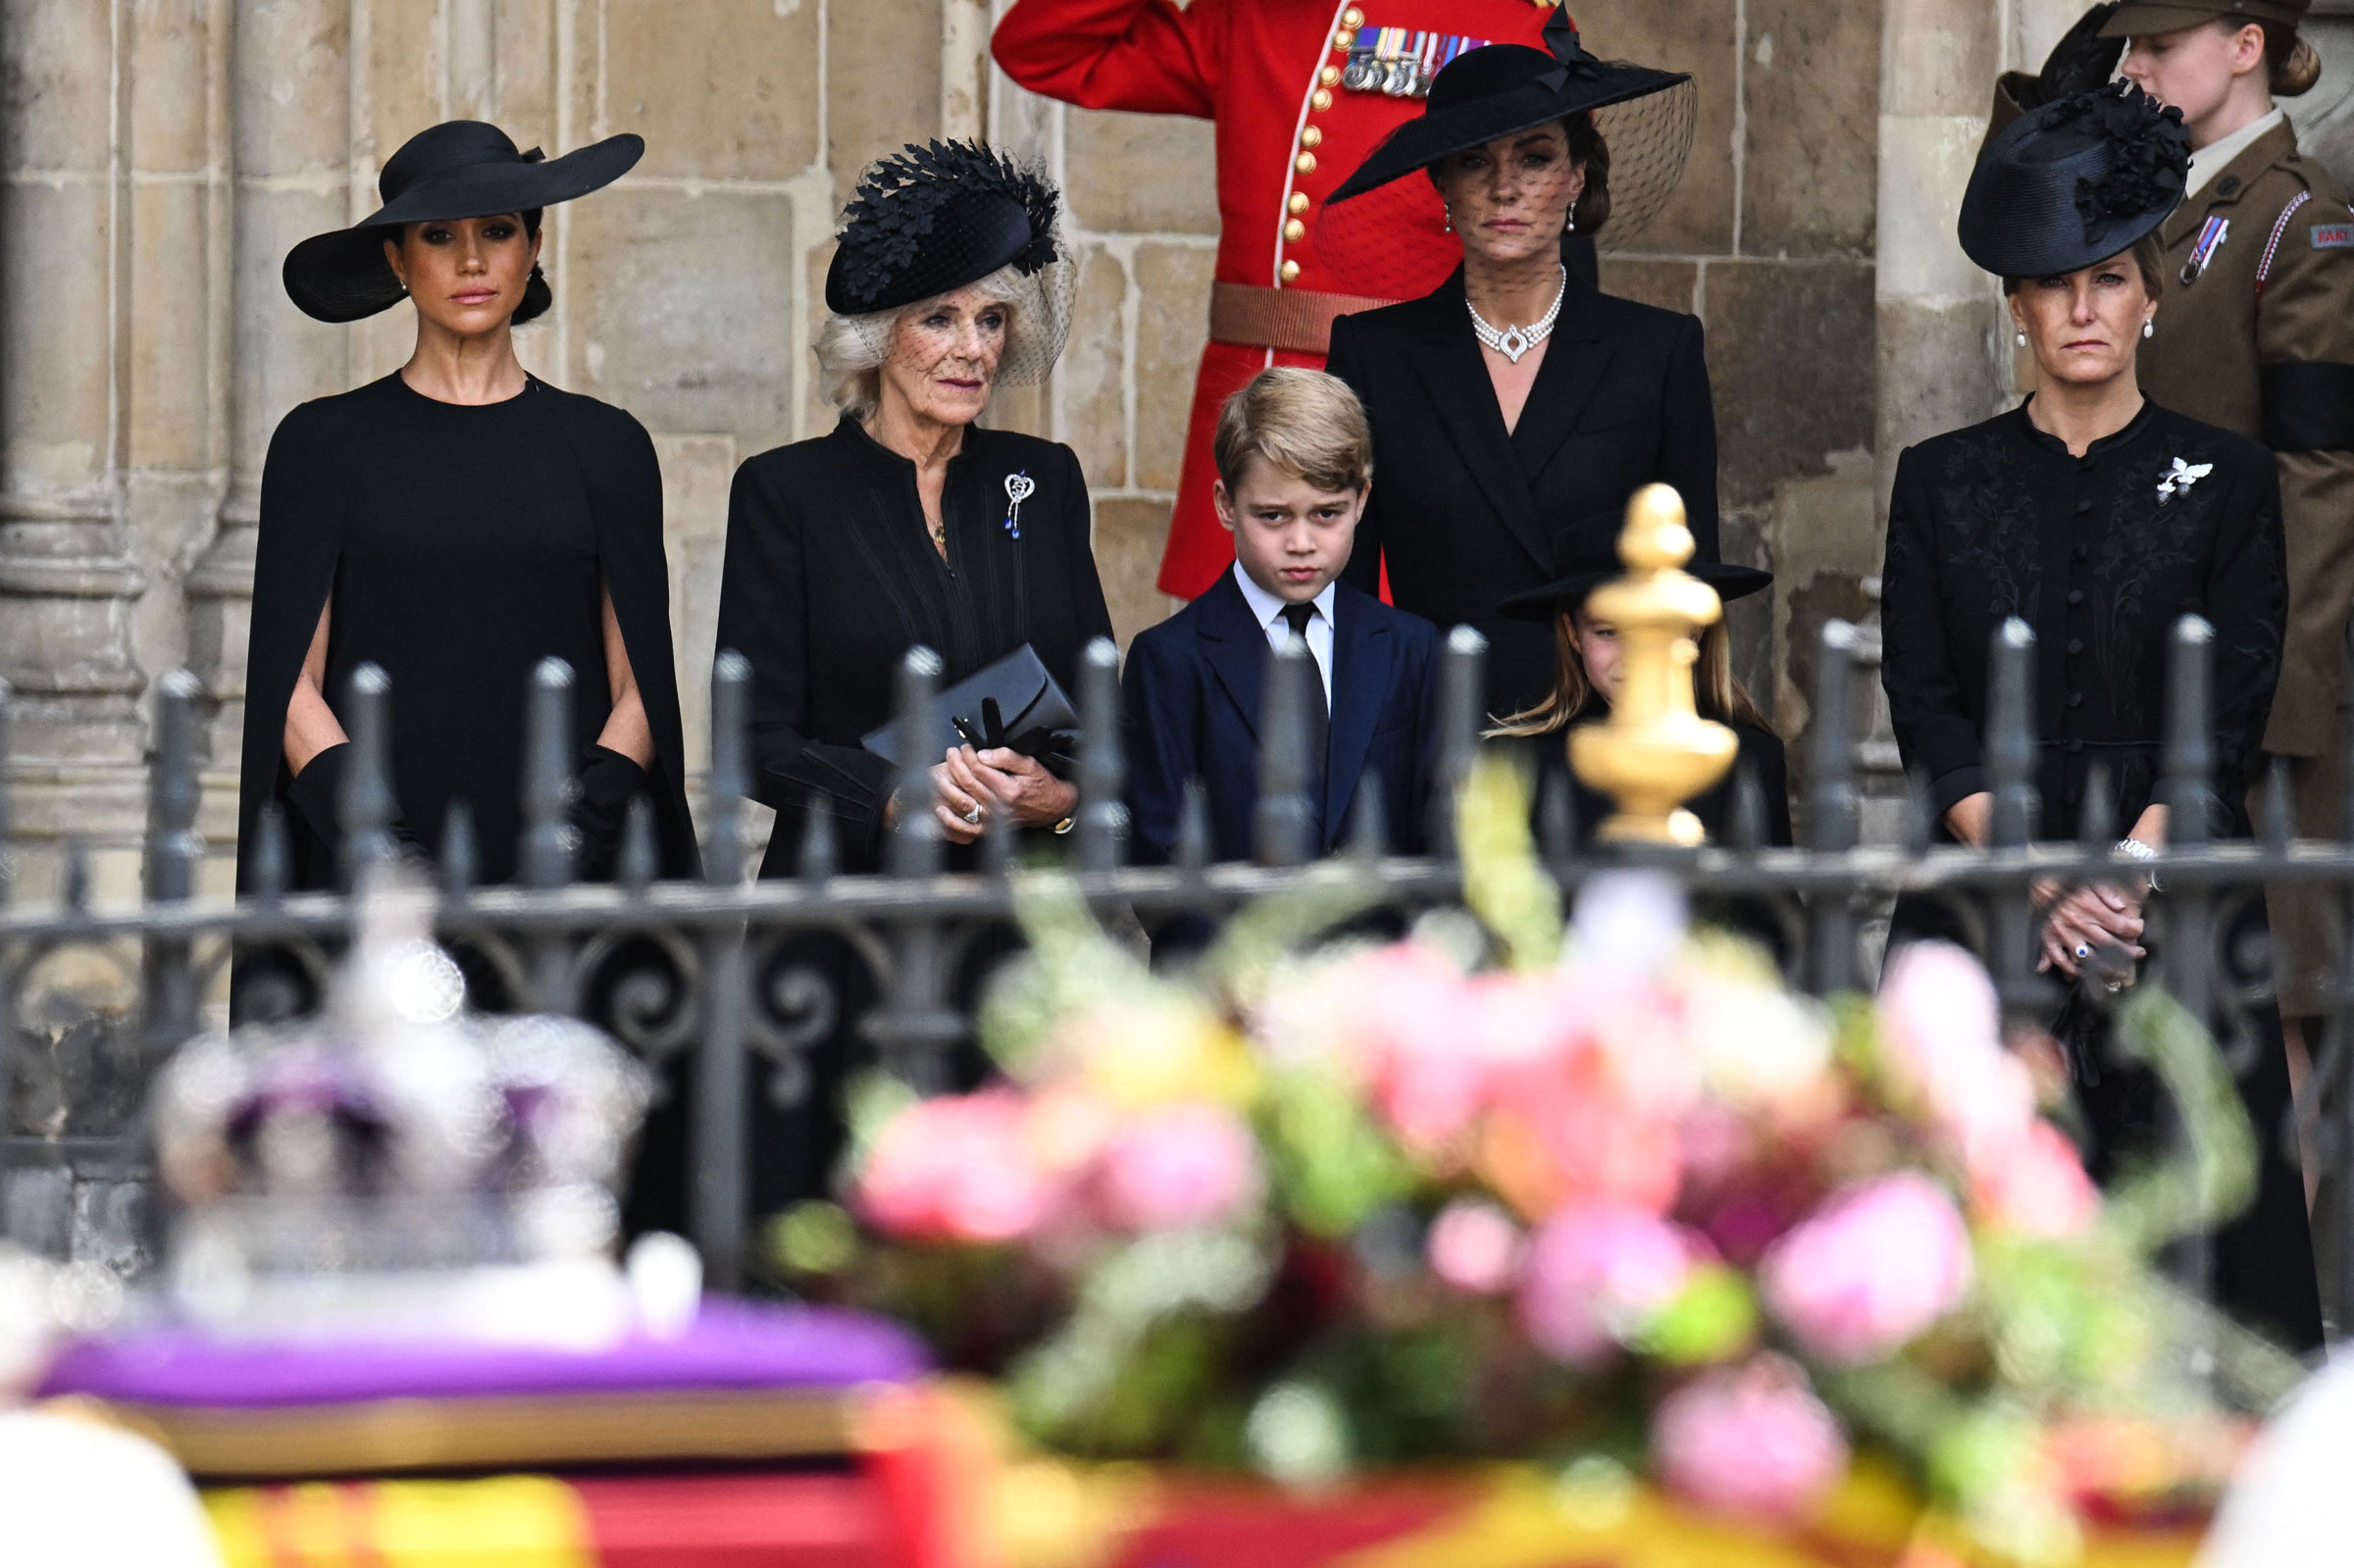 From left: Meghan Markle, Duchess of Sussex;  Camilla, queen consort;  Prince George of Wales;  Catherine, Princess of Wales;  and Sophie, Countess of Wessex, view of Queen Elizabeth II's coffin leaving Westminster Abbey.  (Oli Scarff—Pool/AFP/Getty Images)